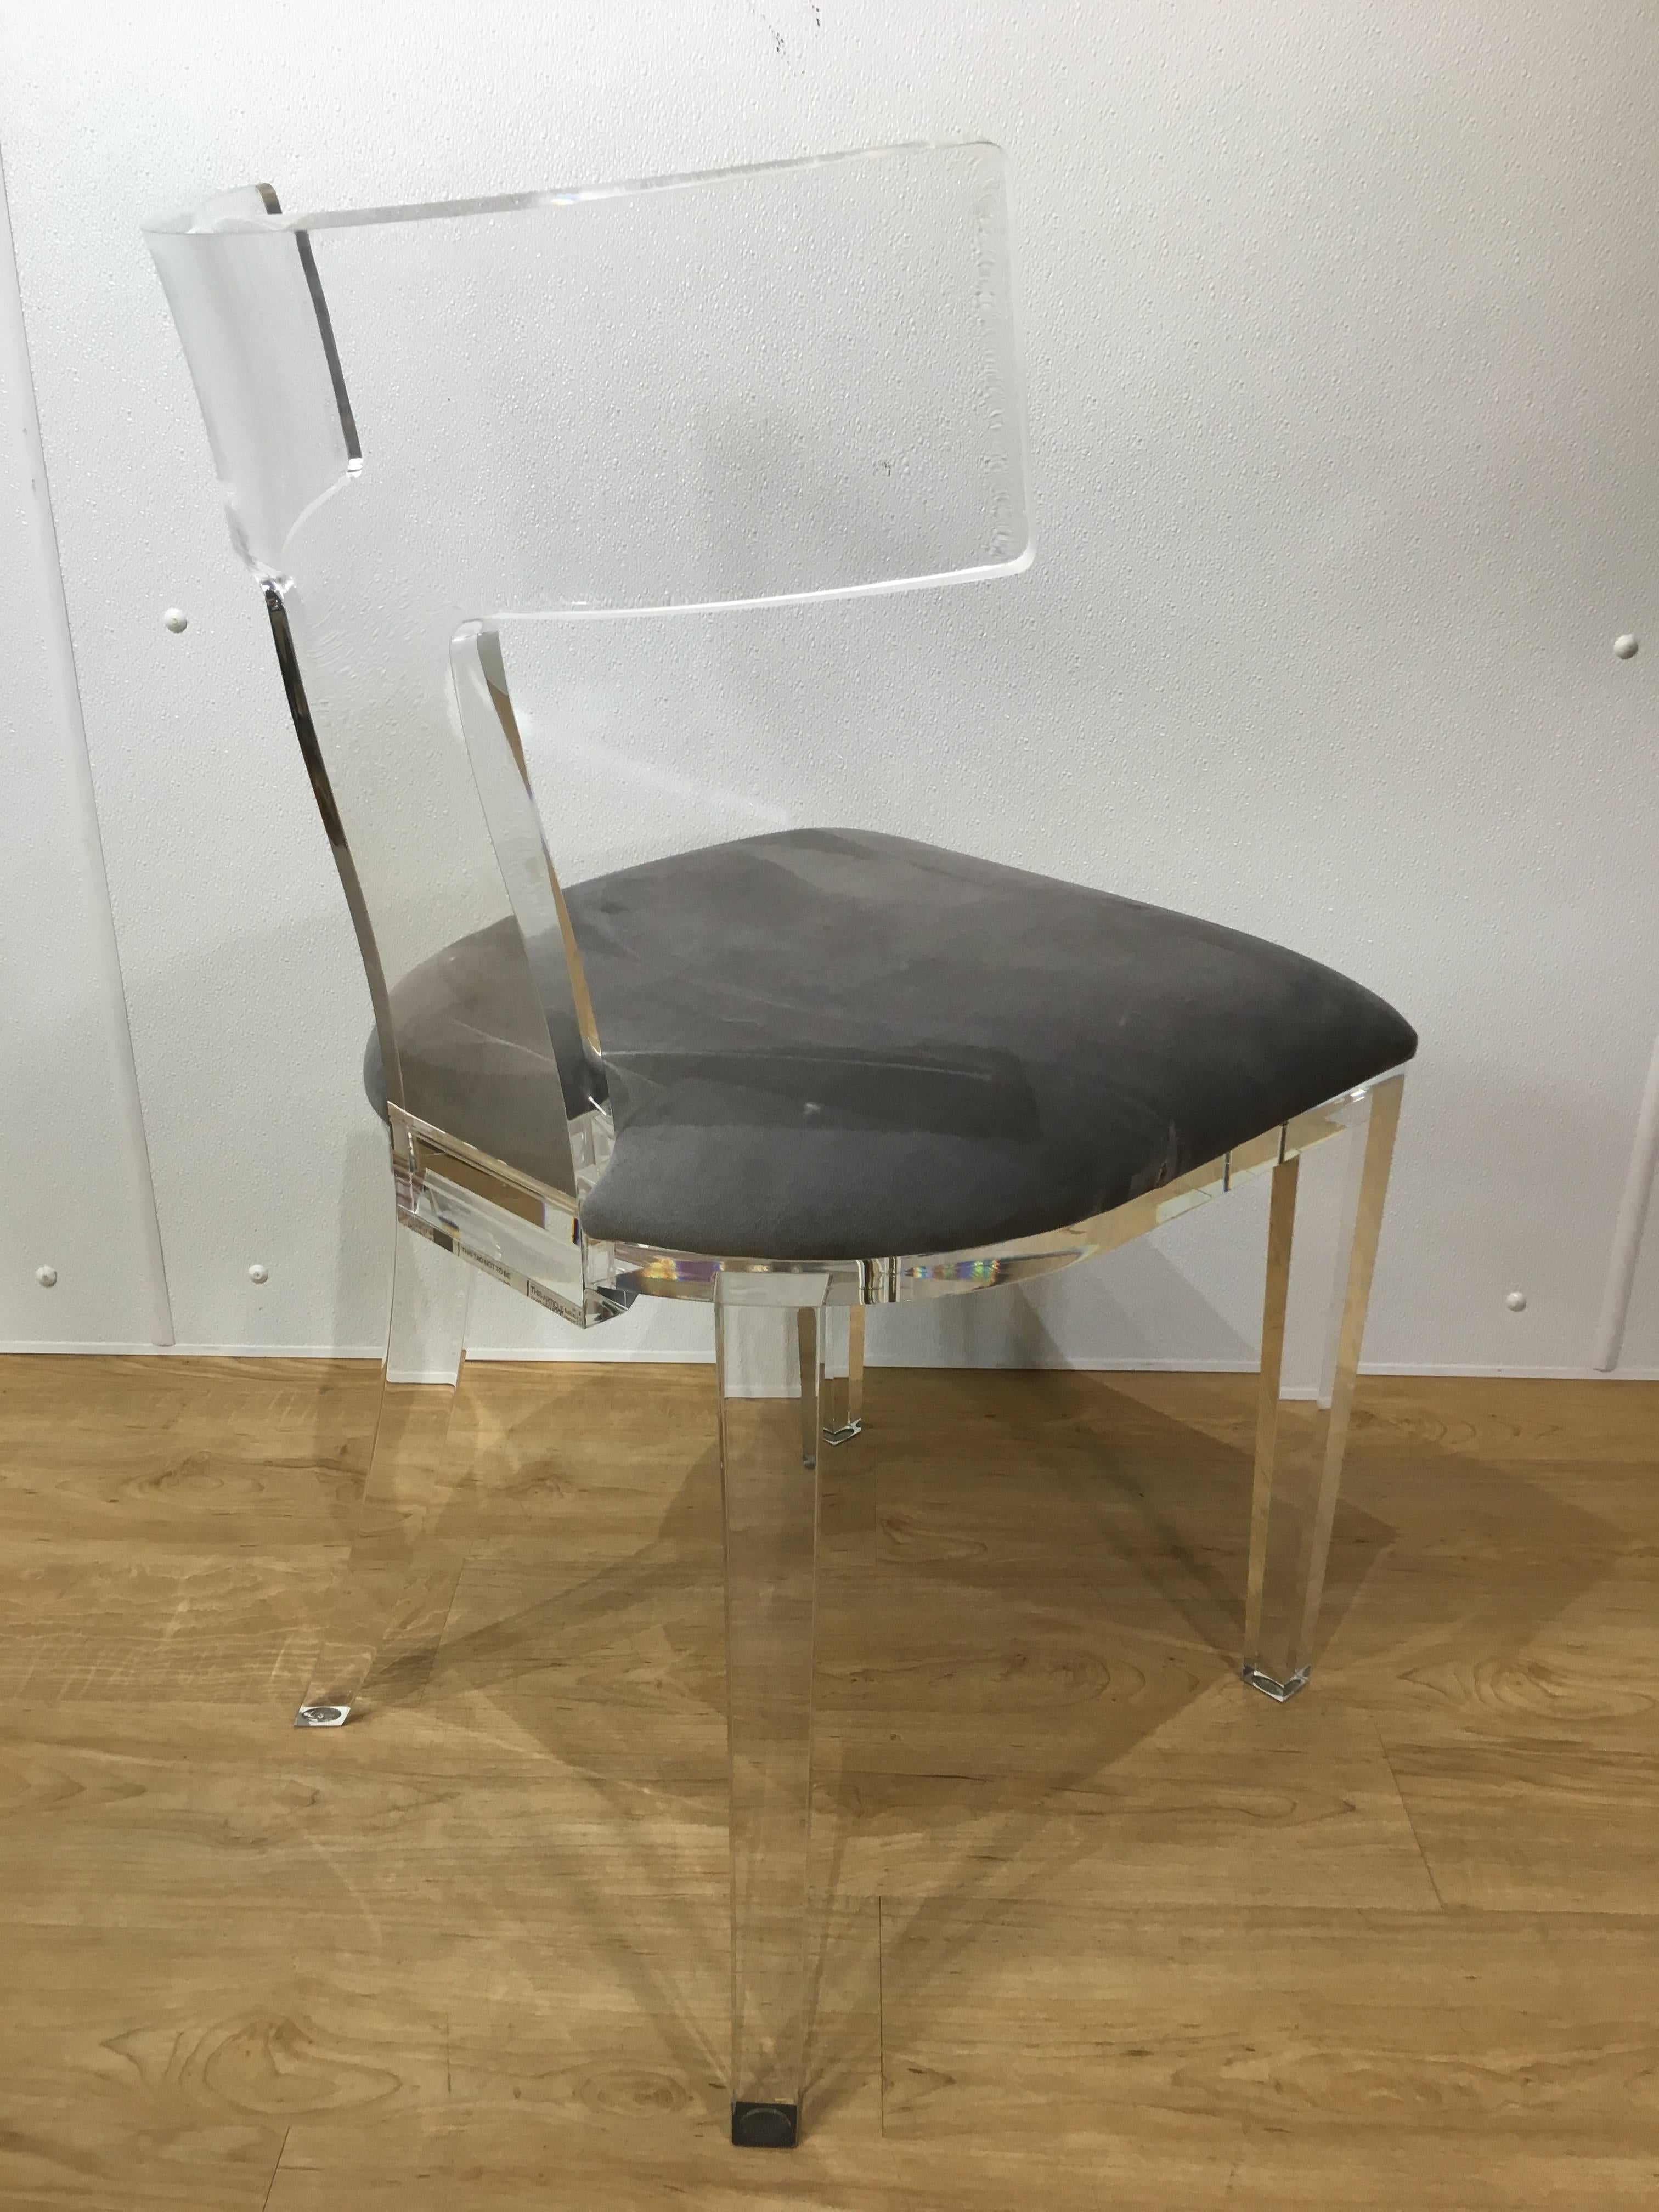 A single Lucite "T" back chair made of one solid piece of Lucite. Very heavy construction.